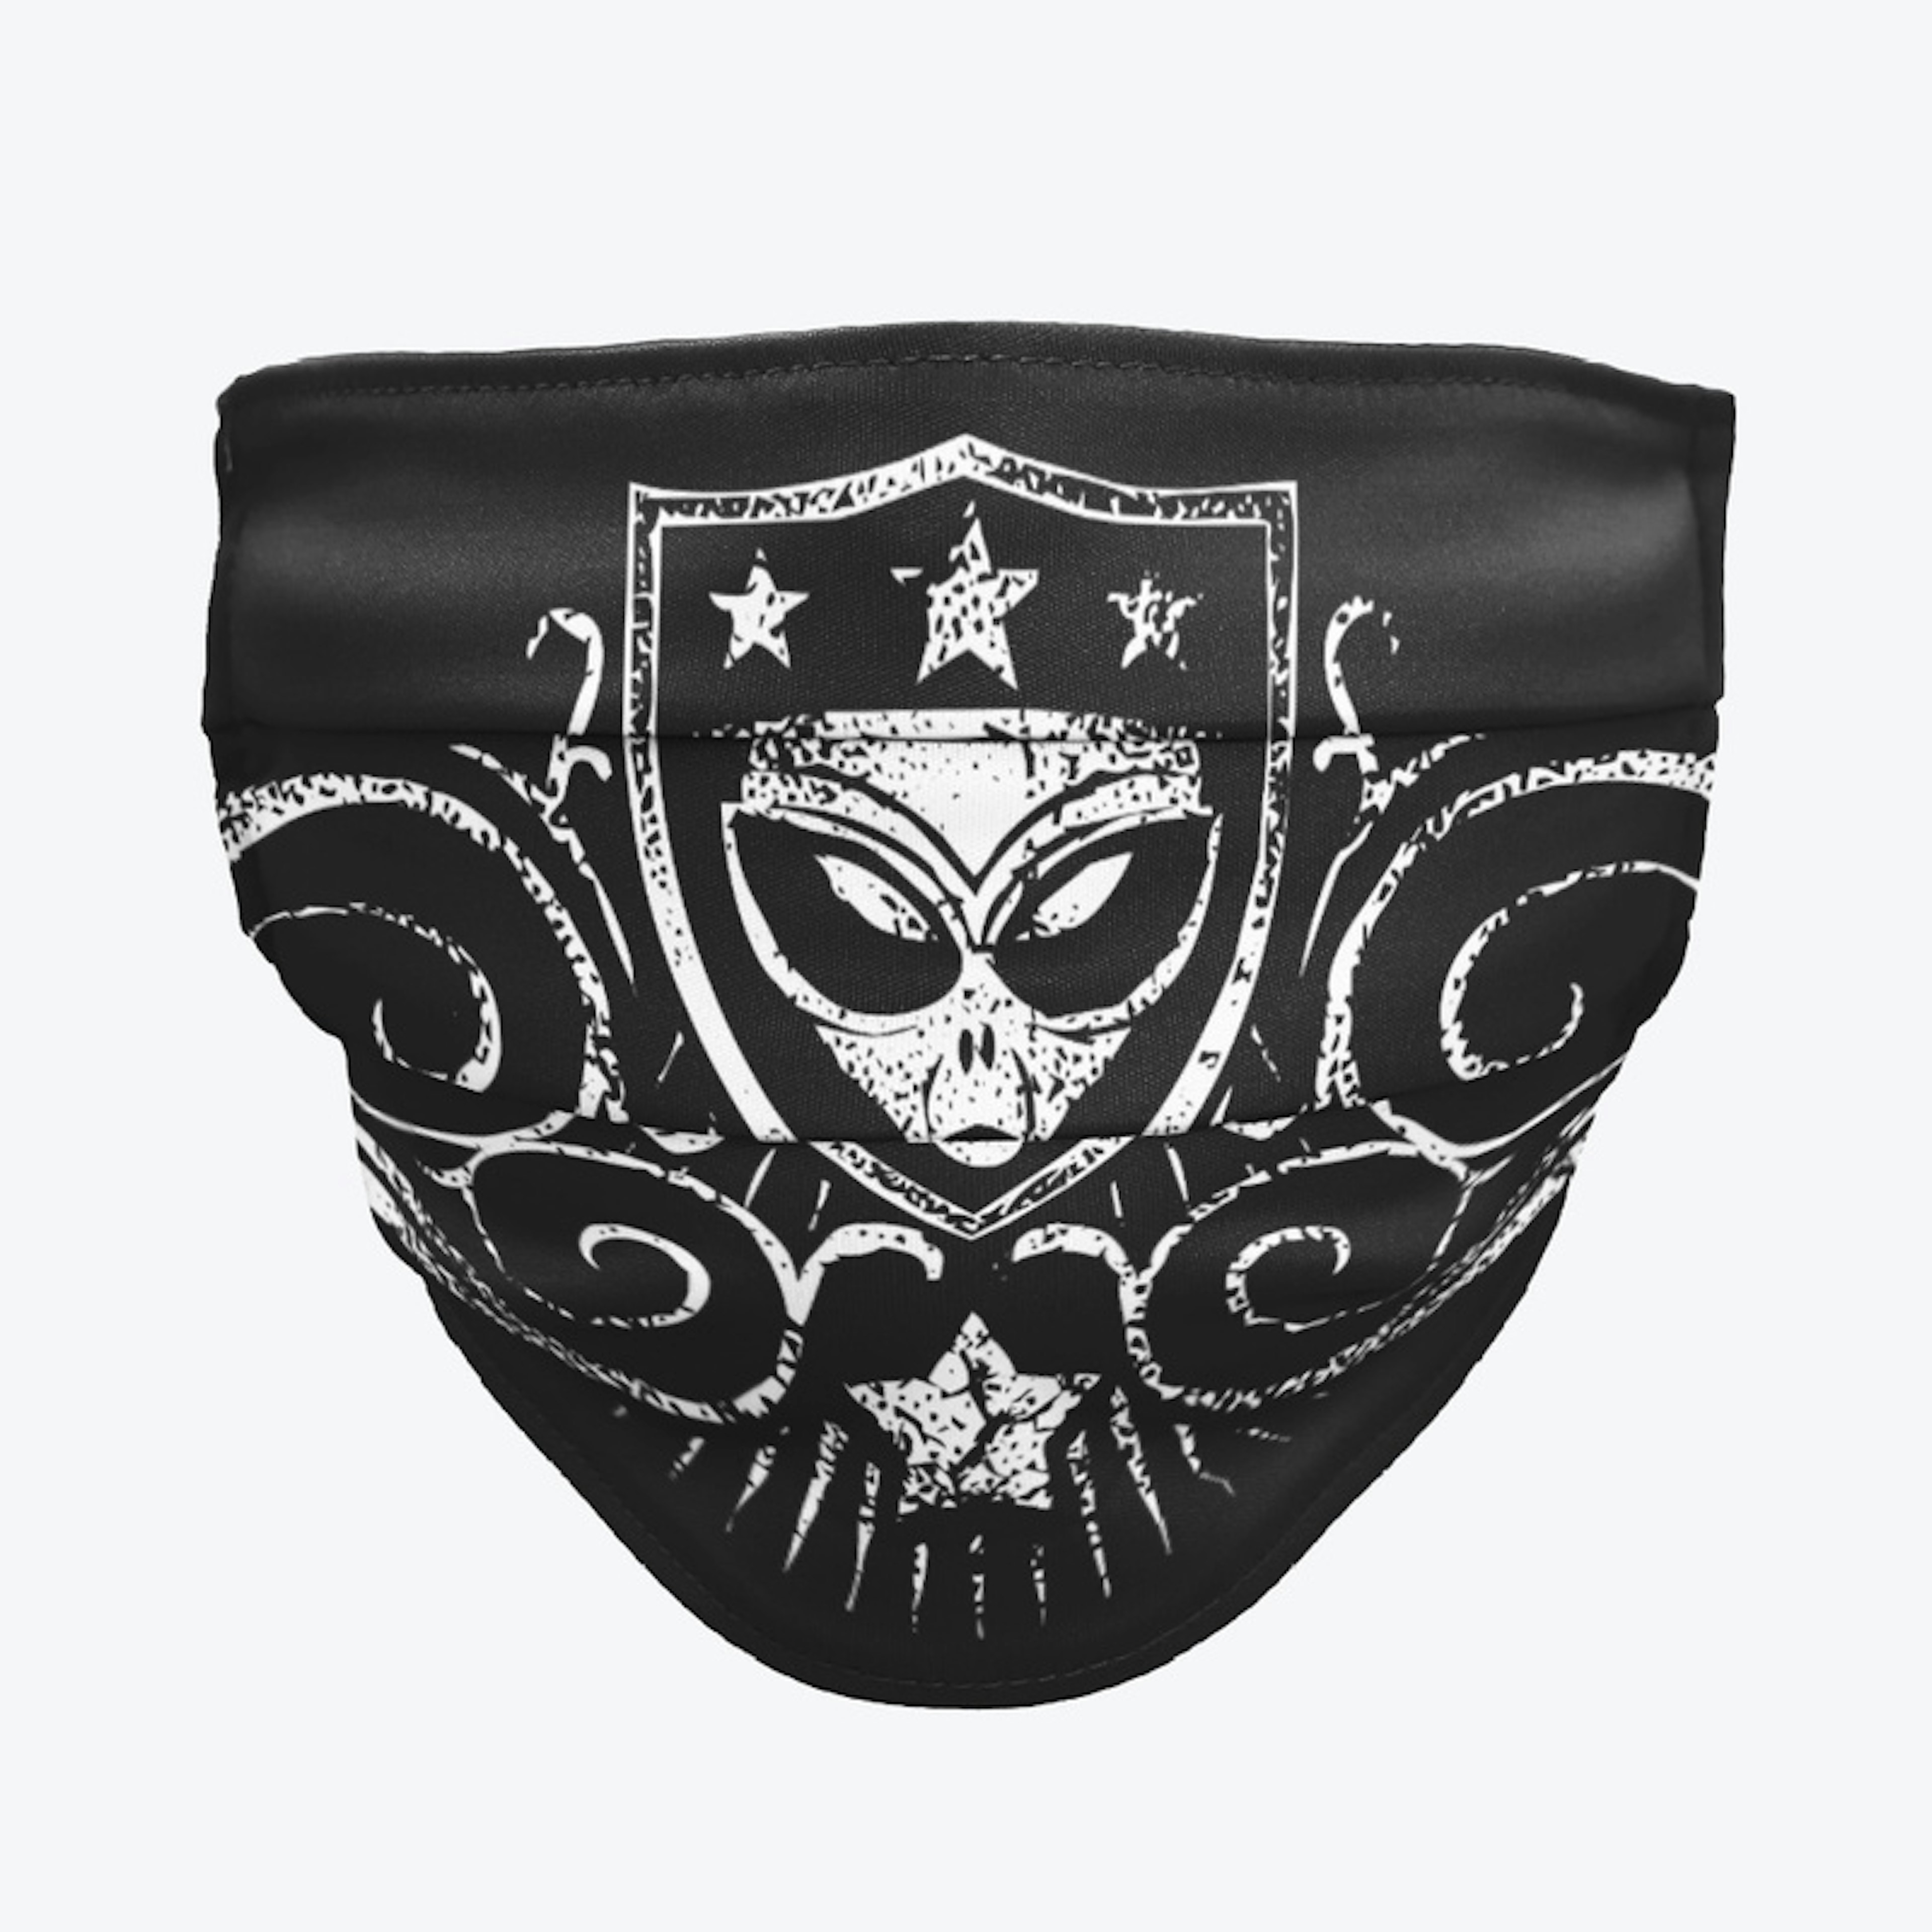 Will Black 'alien' cloth facemask 2